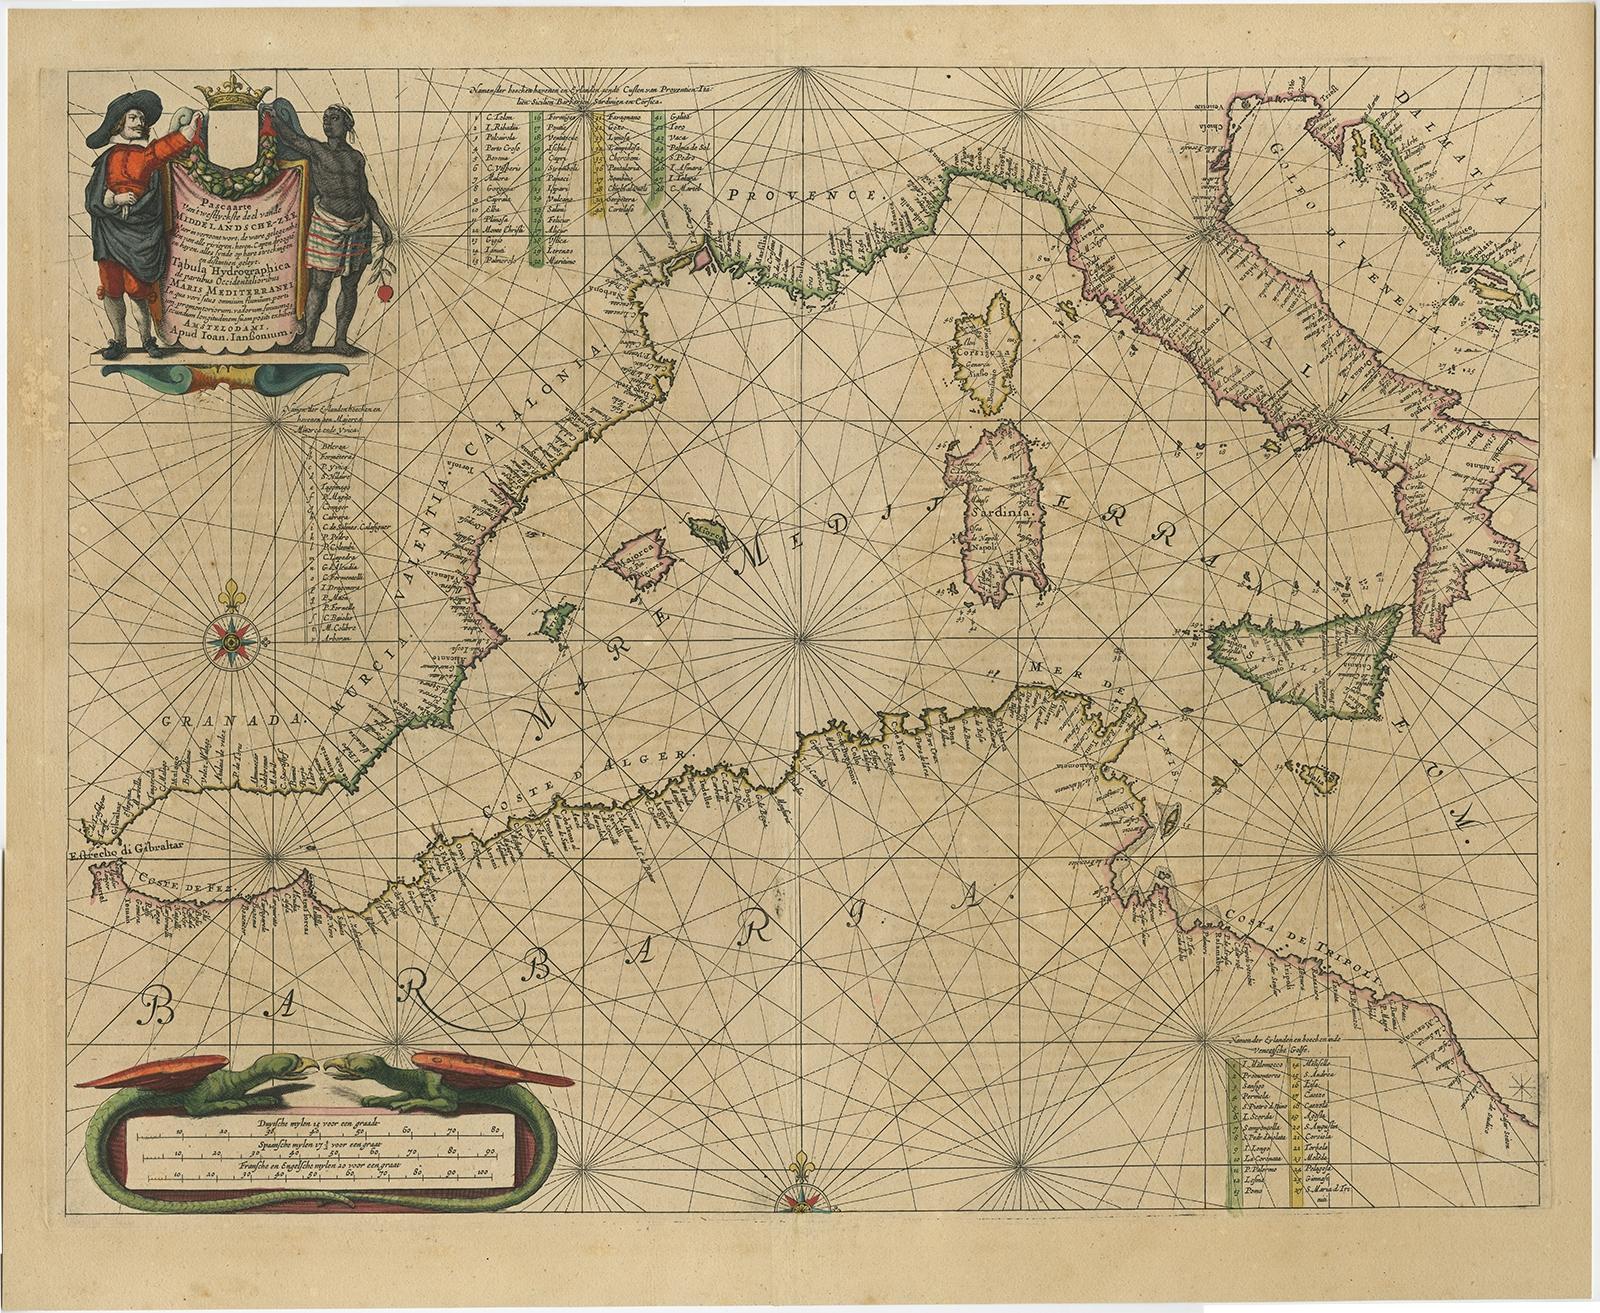 Antique map titled 'Pascaerte van 't westlyckste deel vande Middelandsche-Zee (..)'. 

Sea chart of the Western Mediterranean. The map extends from the Straits of Gibralter to Italy and Sicily and the Coast of Dalmatia. Originates from 'Atlantis